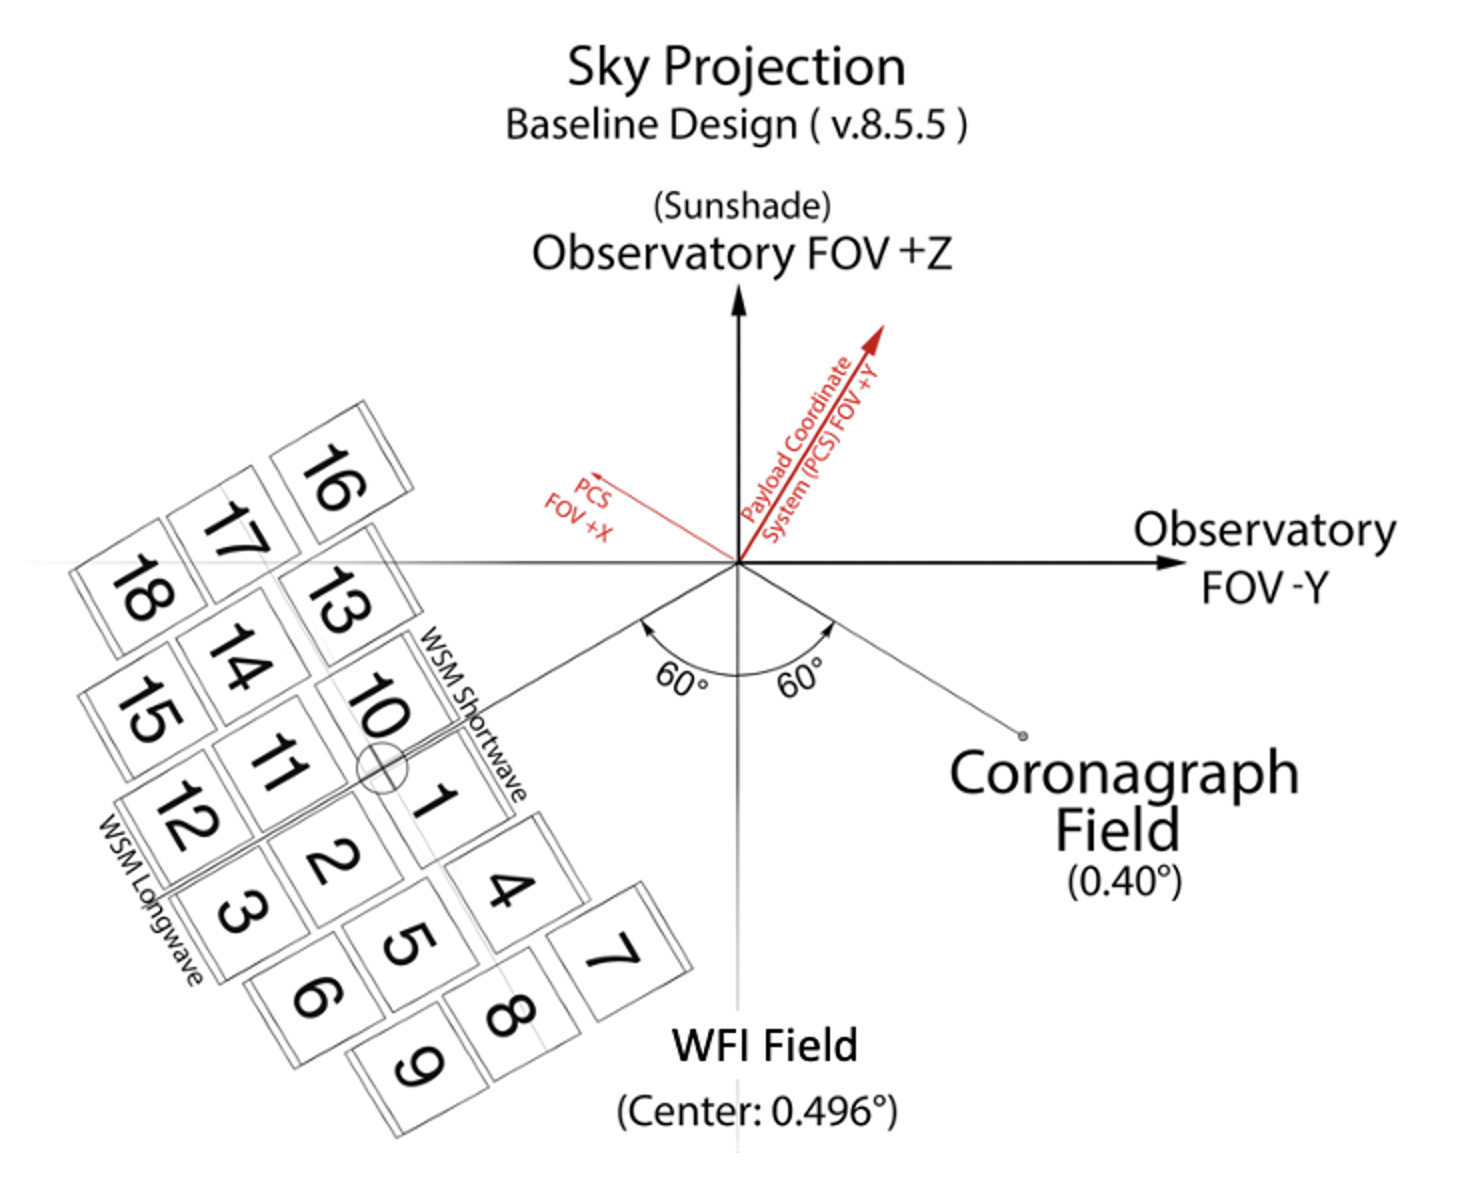 The Optical Field Layout of the observatory demonstrating the angles between the detectors and the instruments. 